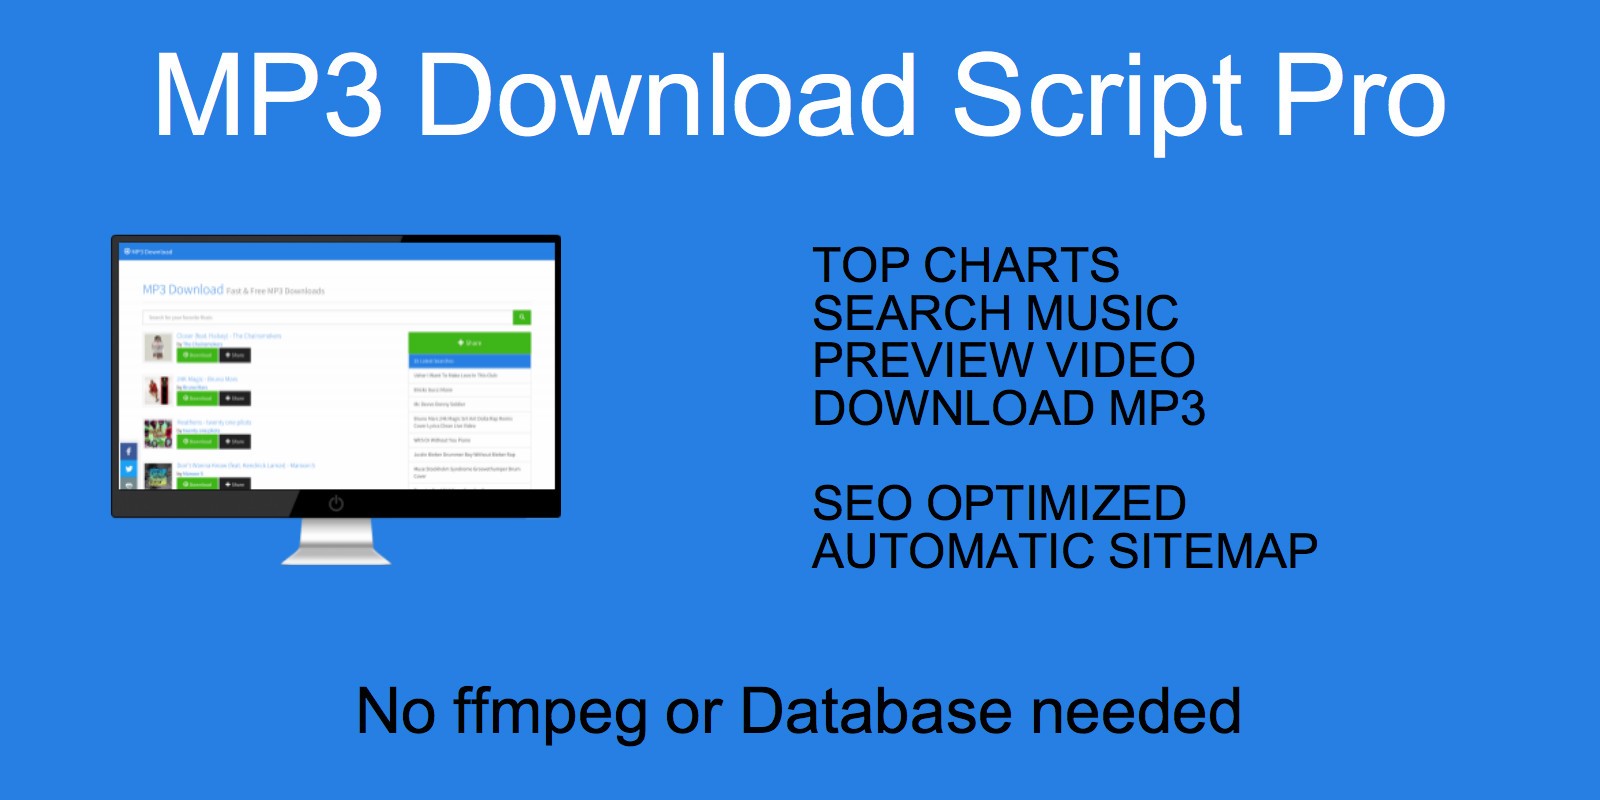 Php скрипт. Search engine php script. Поиск МП. Mp3-Converter-php-script 13409593 nulled. Мп поиск